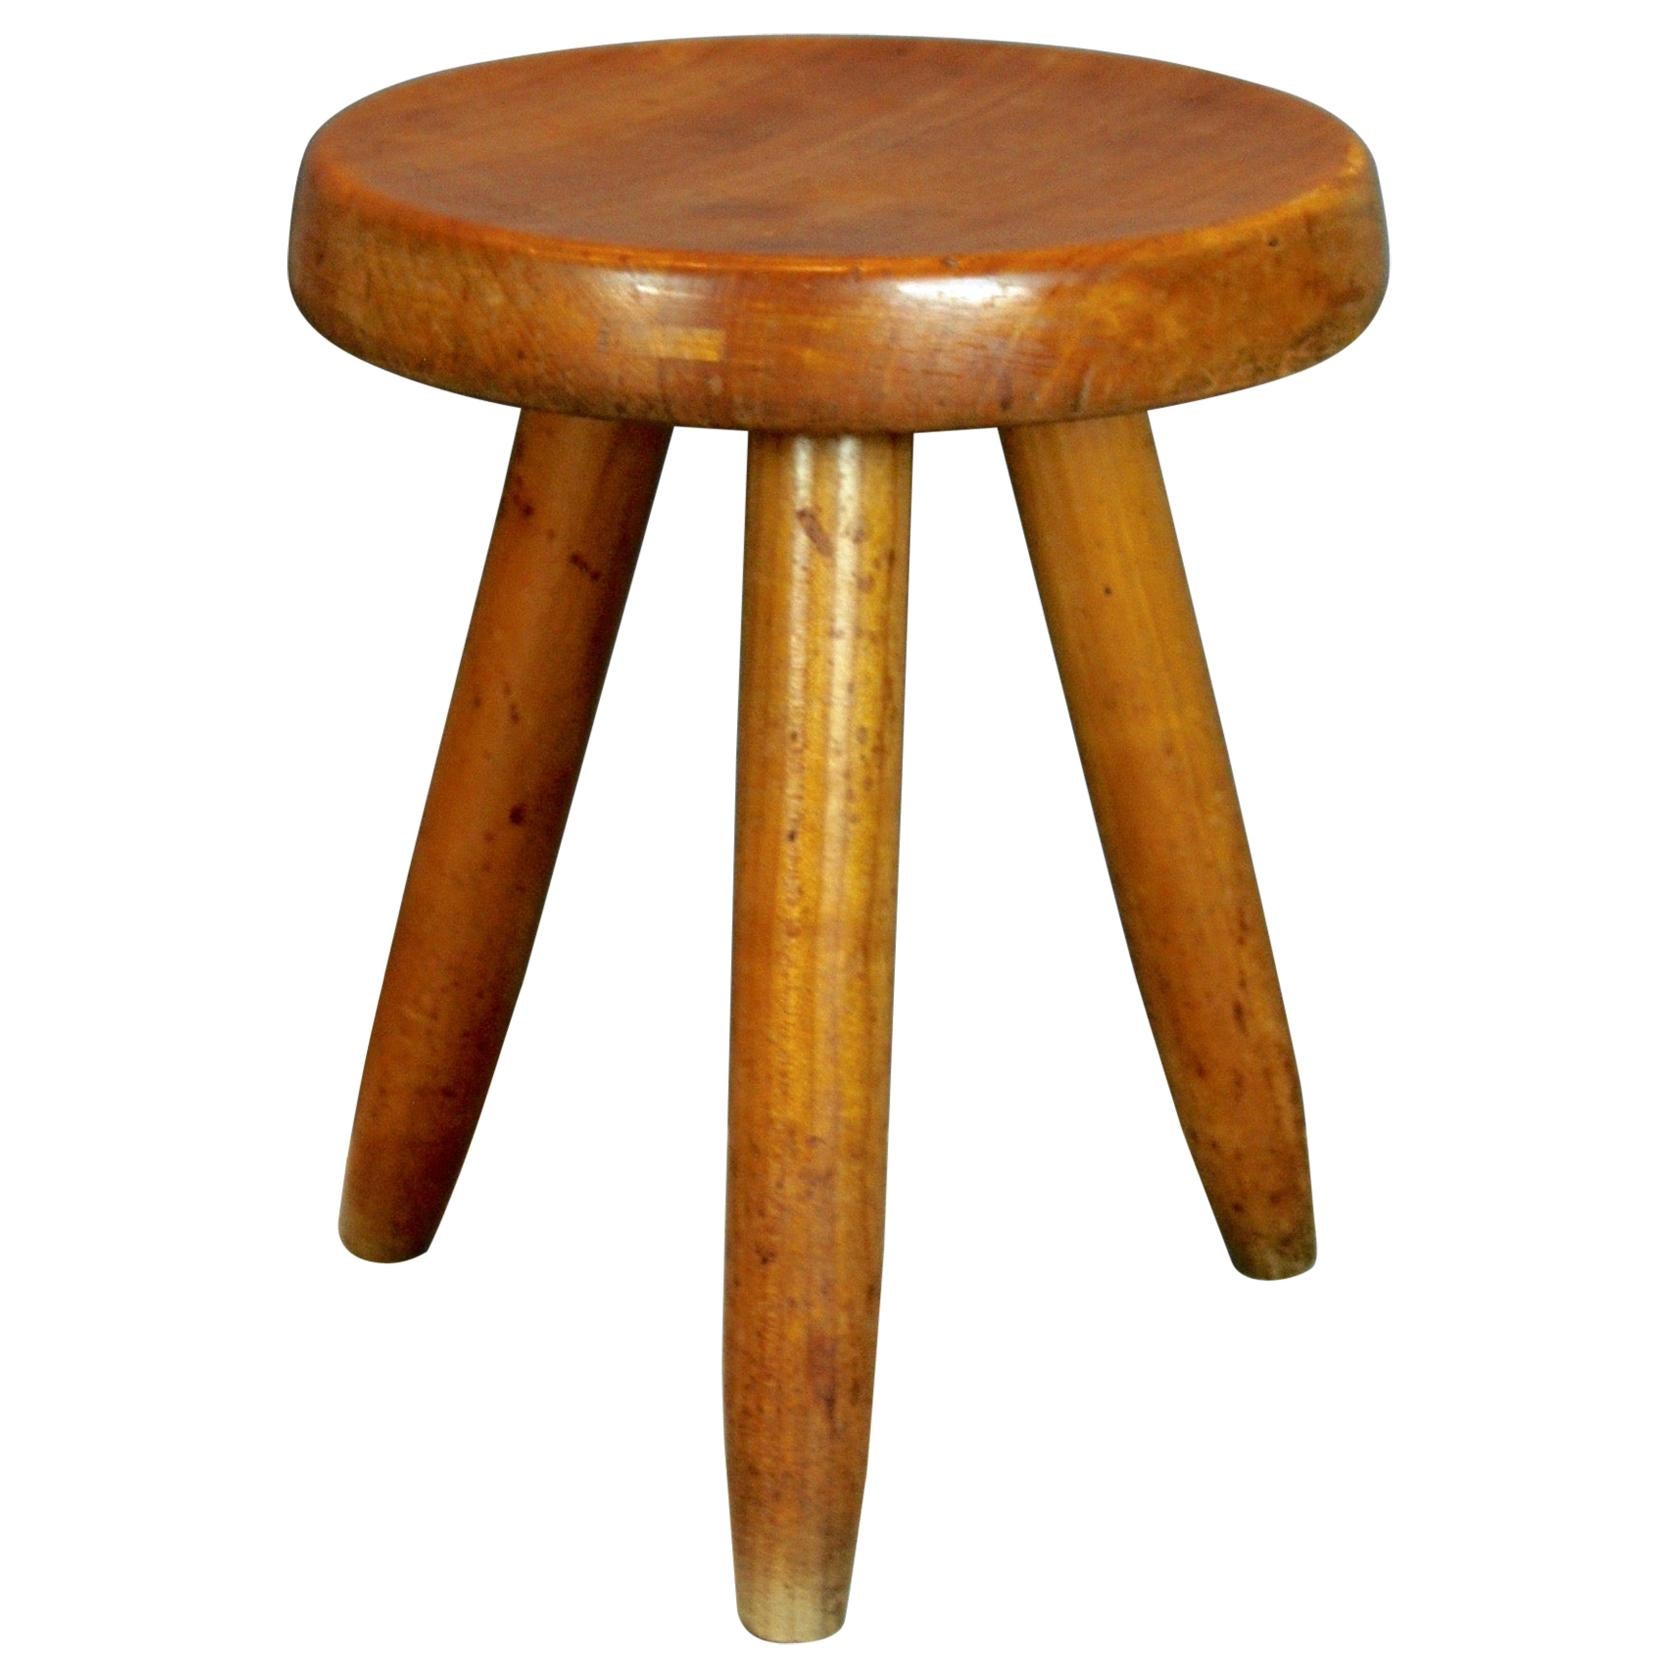 Charlotte Perriand, Solid Elm Stool, 1953